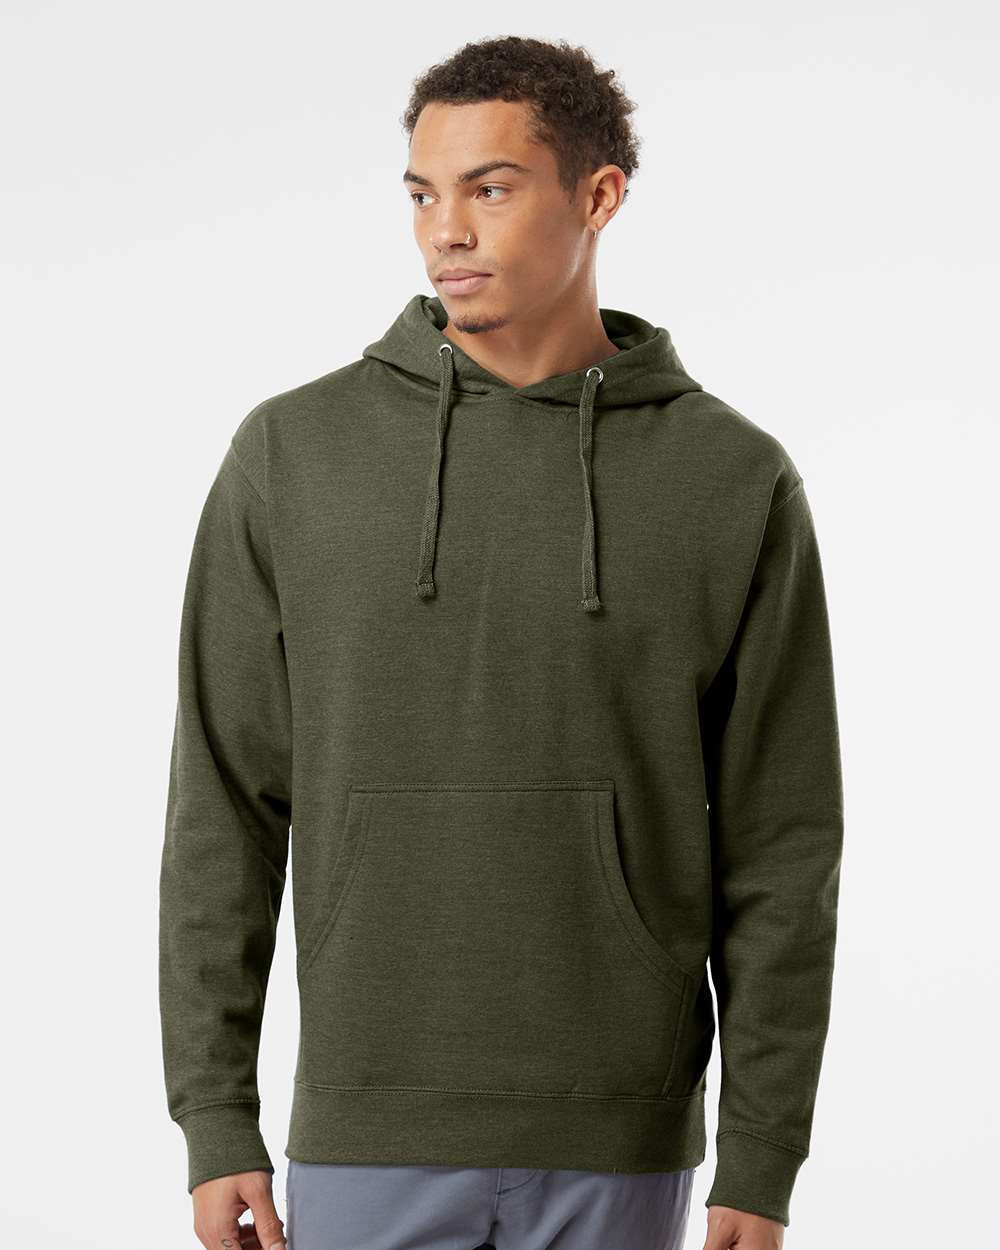 Independent Trading Co. Midweight Hooded Sweatshirt